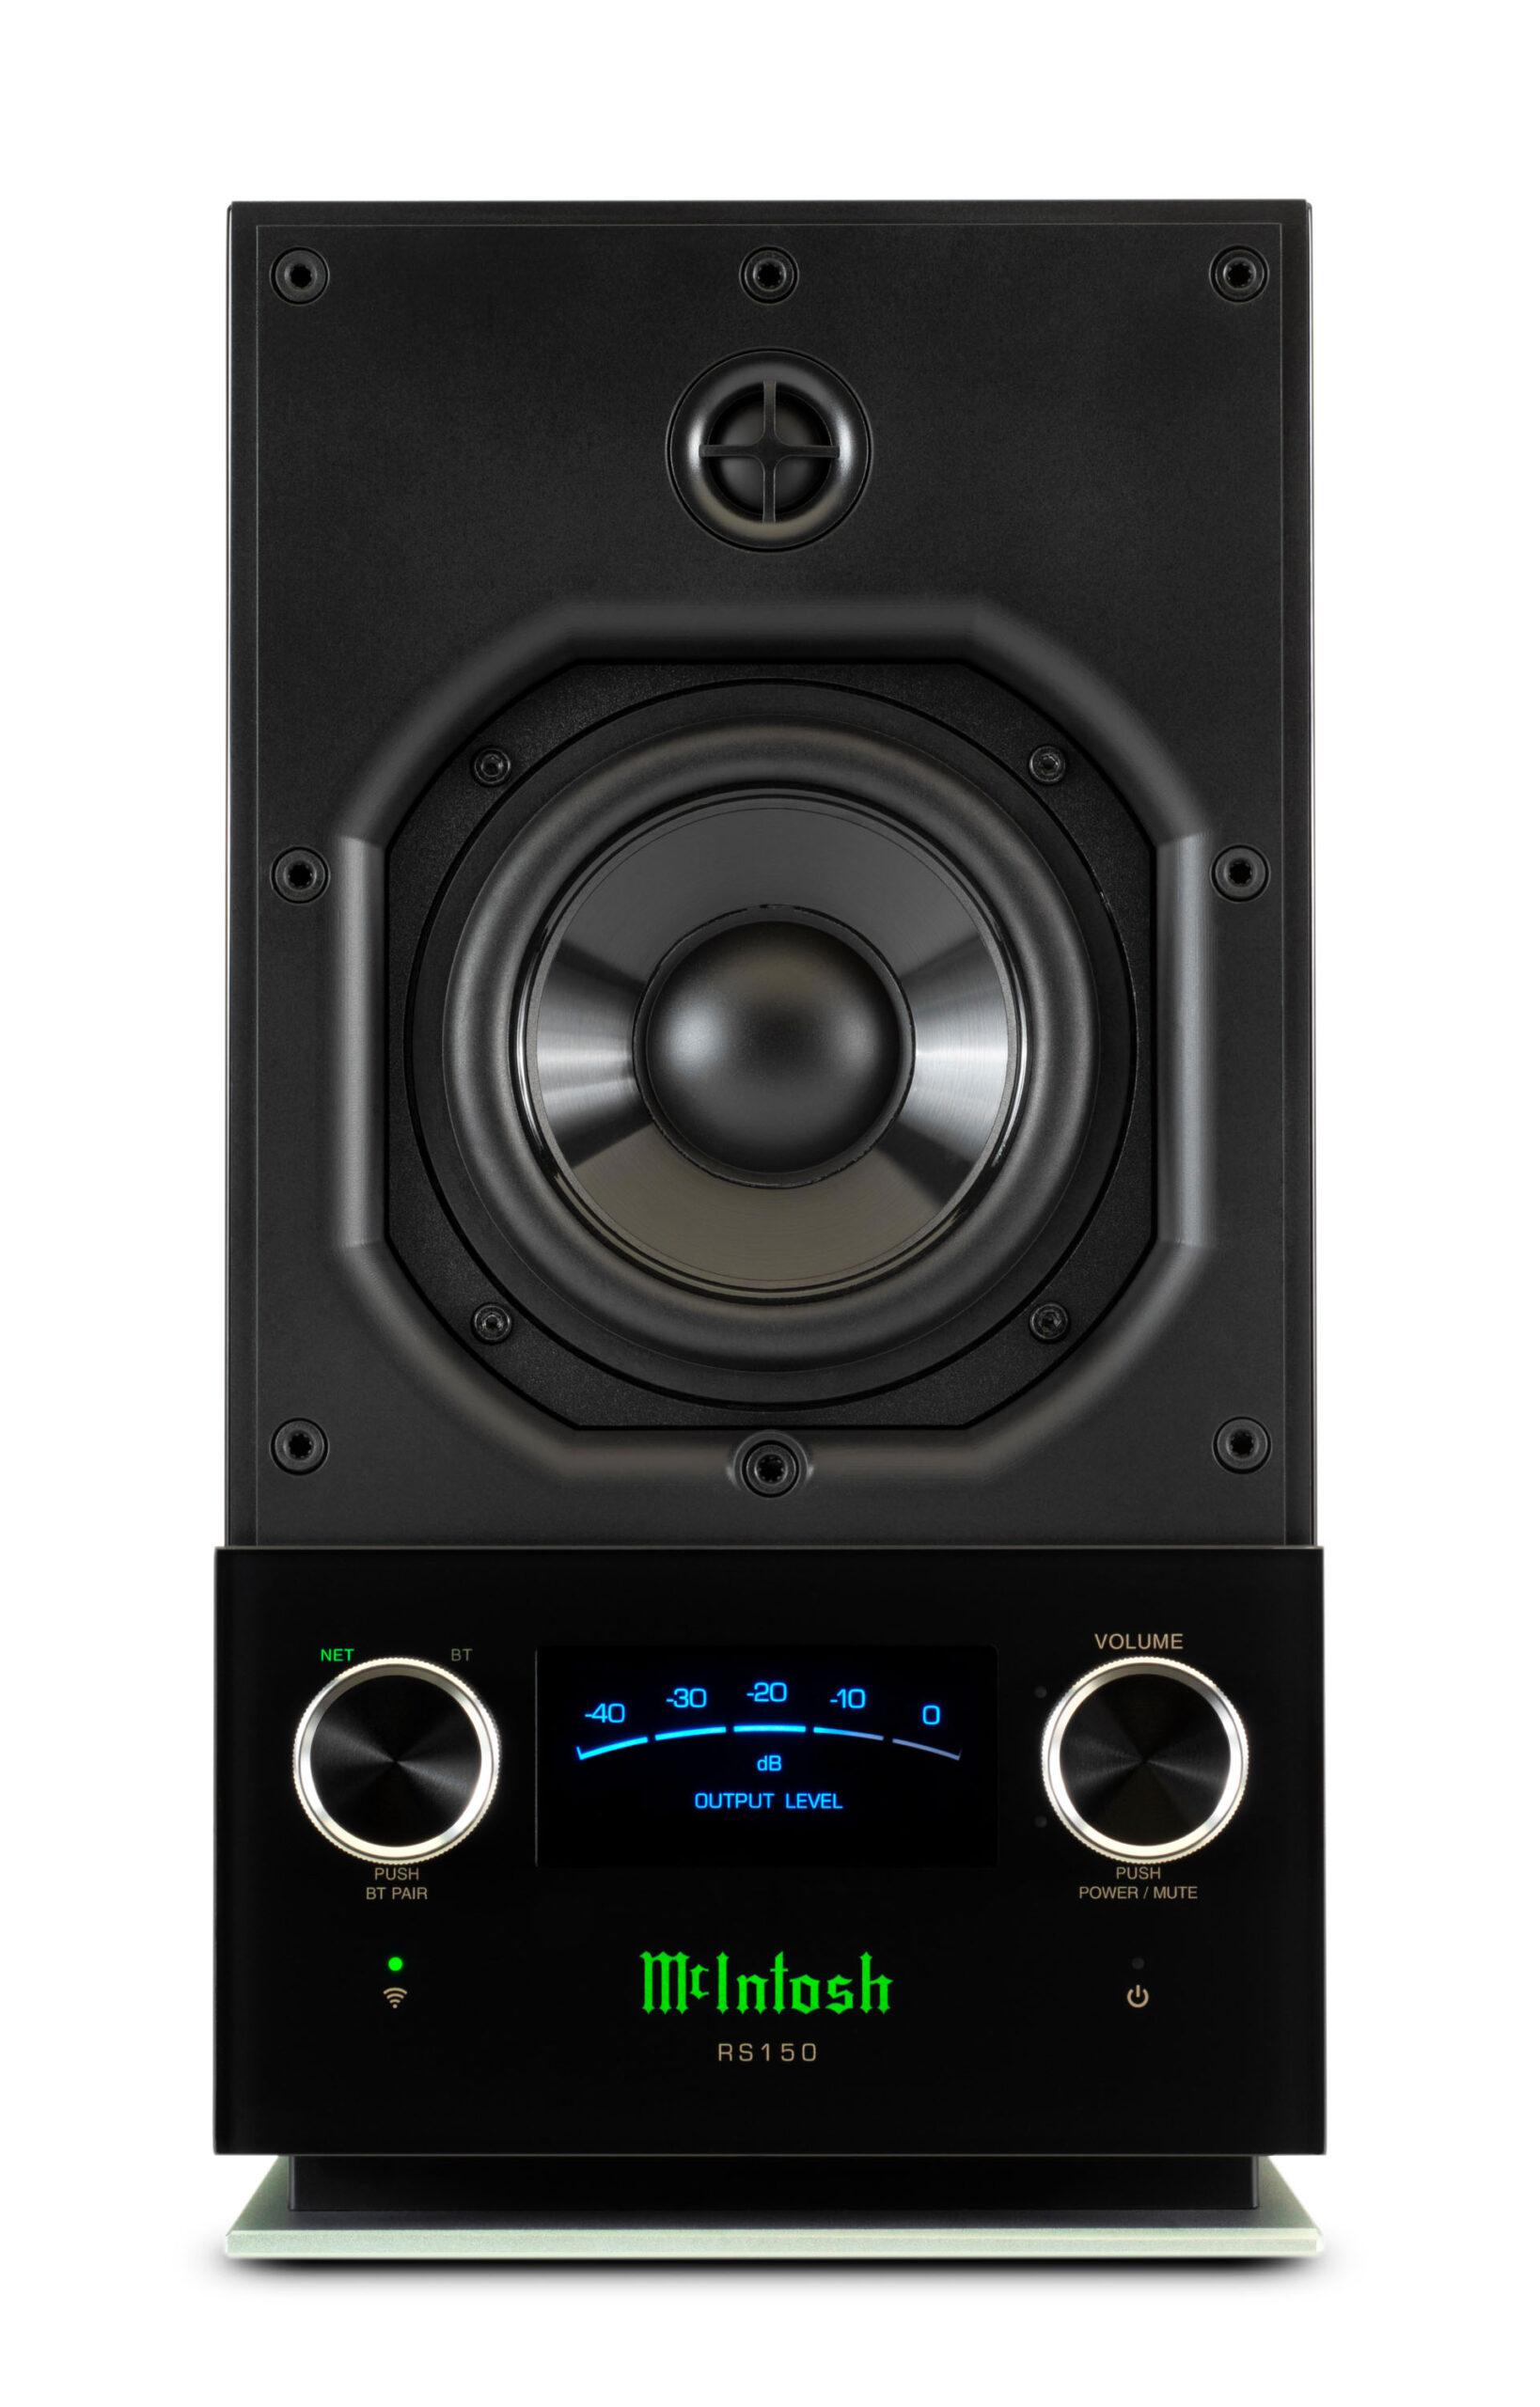 Two wireless speakers, the RS150 and RS250, offer streaming convenience with unmistakable McIntosh style, quality & performance. McIntosh b50dd92b rs150 front no grille hi res scaled